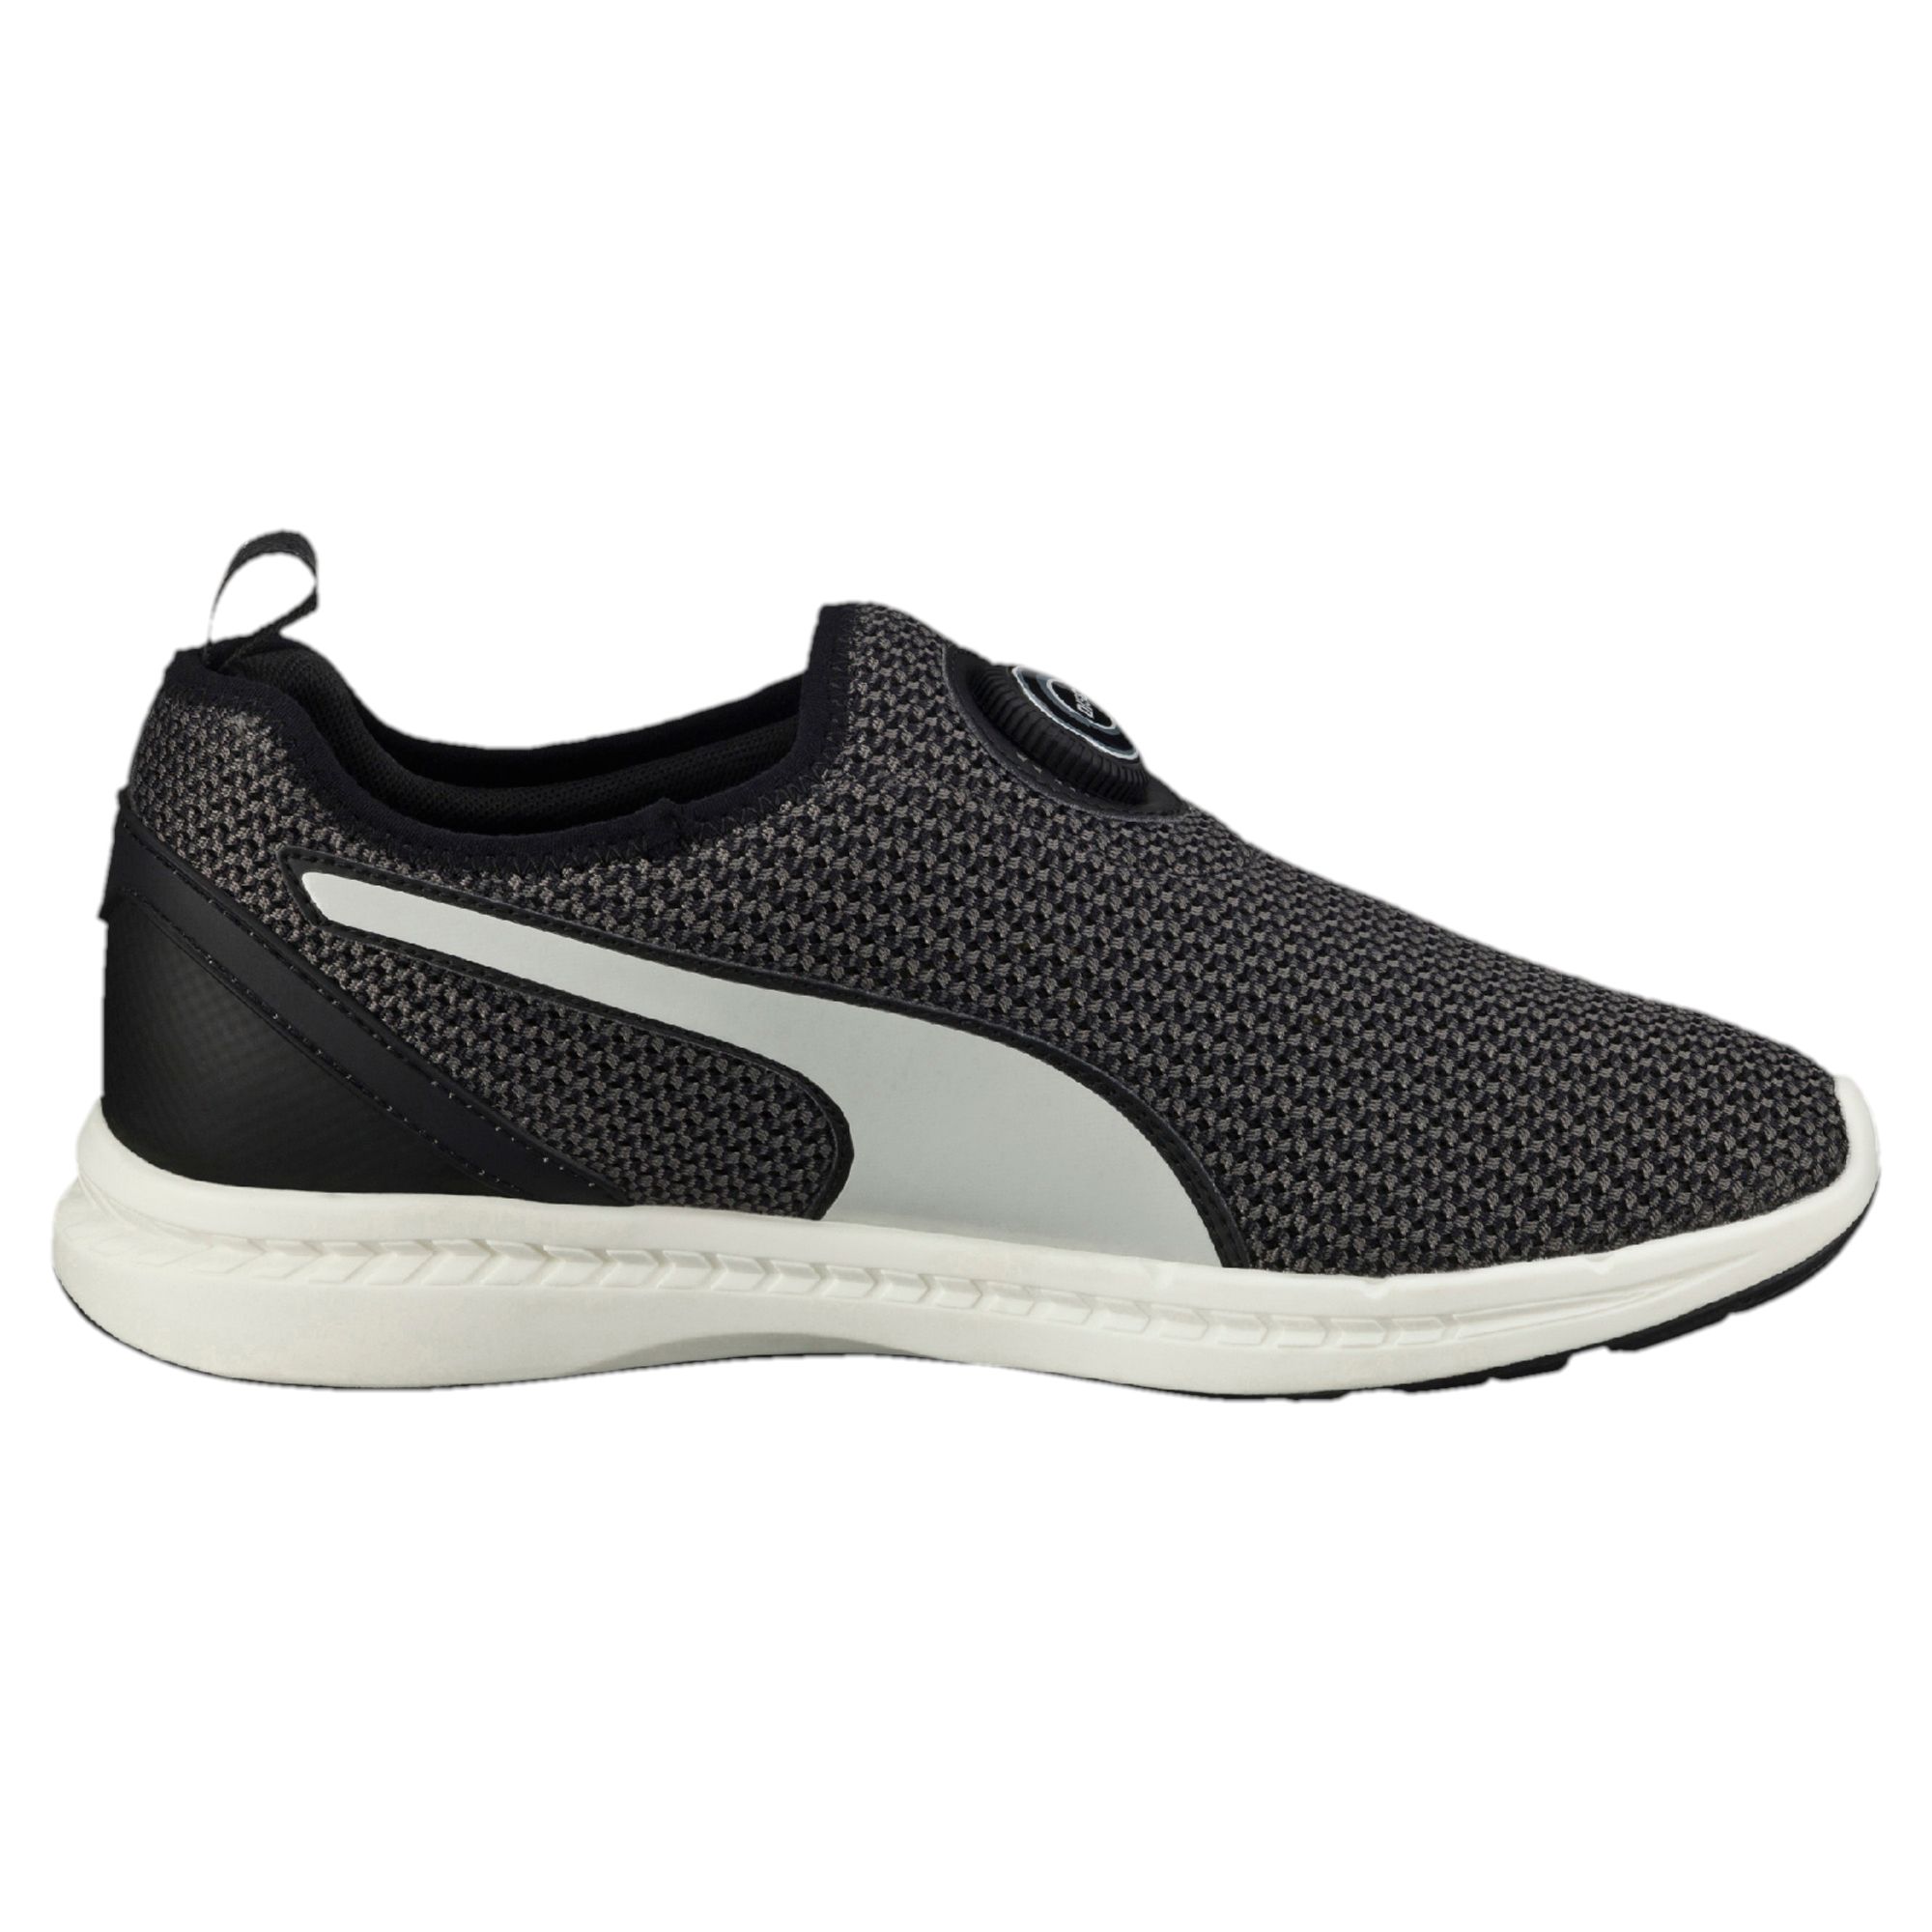 PUMA DISC Sleeve IGNITE Knit Trainers Low Boot Unisex New | eBay